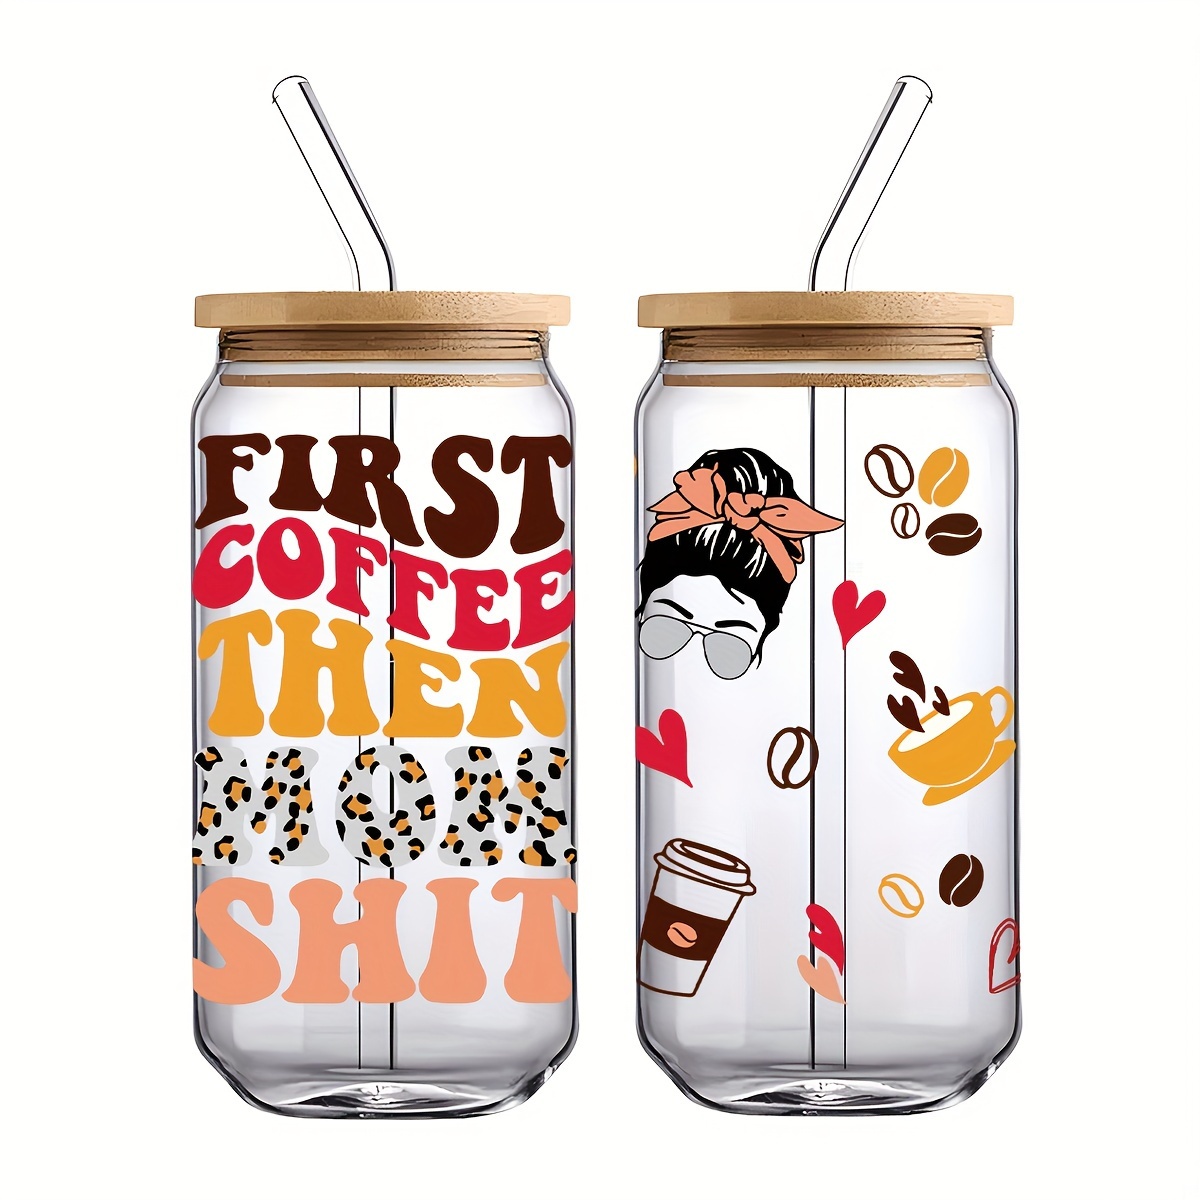 First Drink the COFFEE UV DTF Cup Wrap